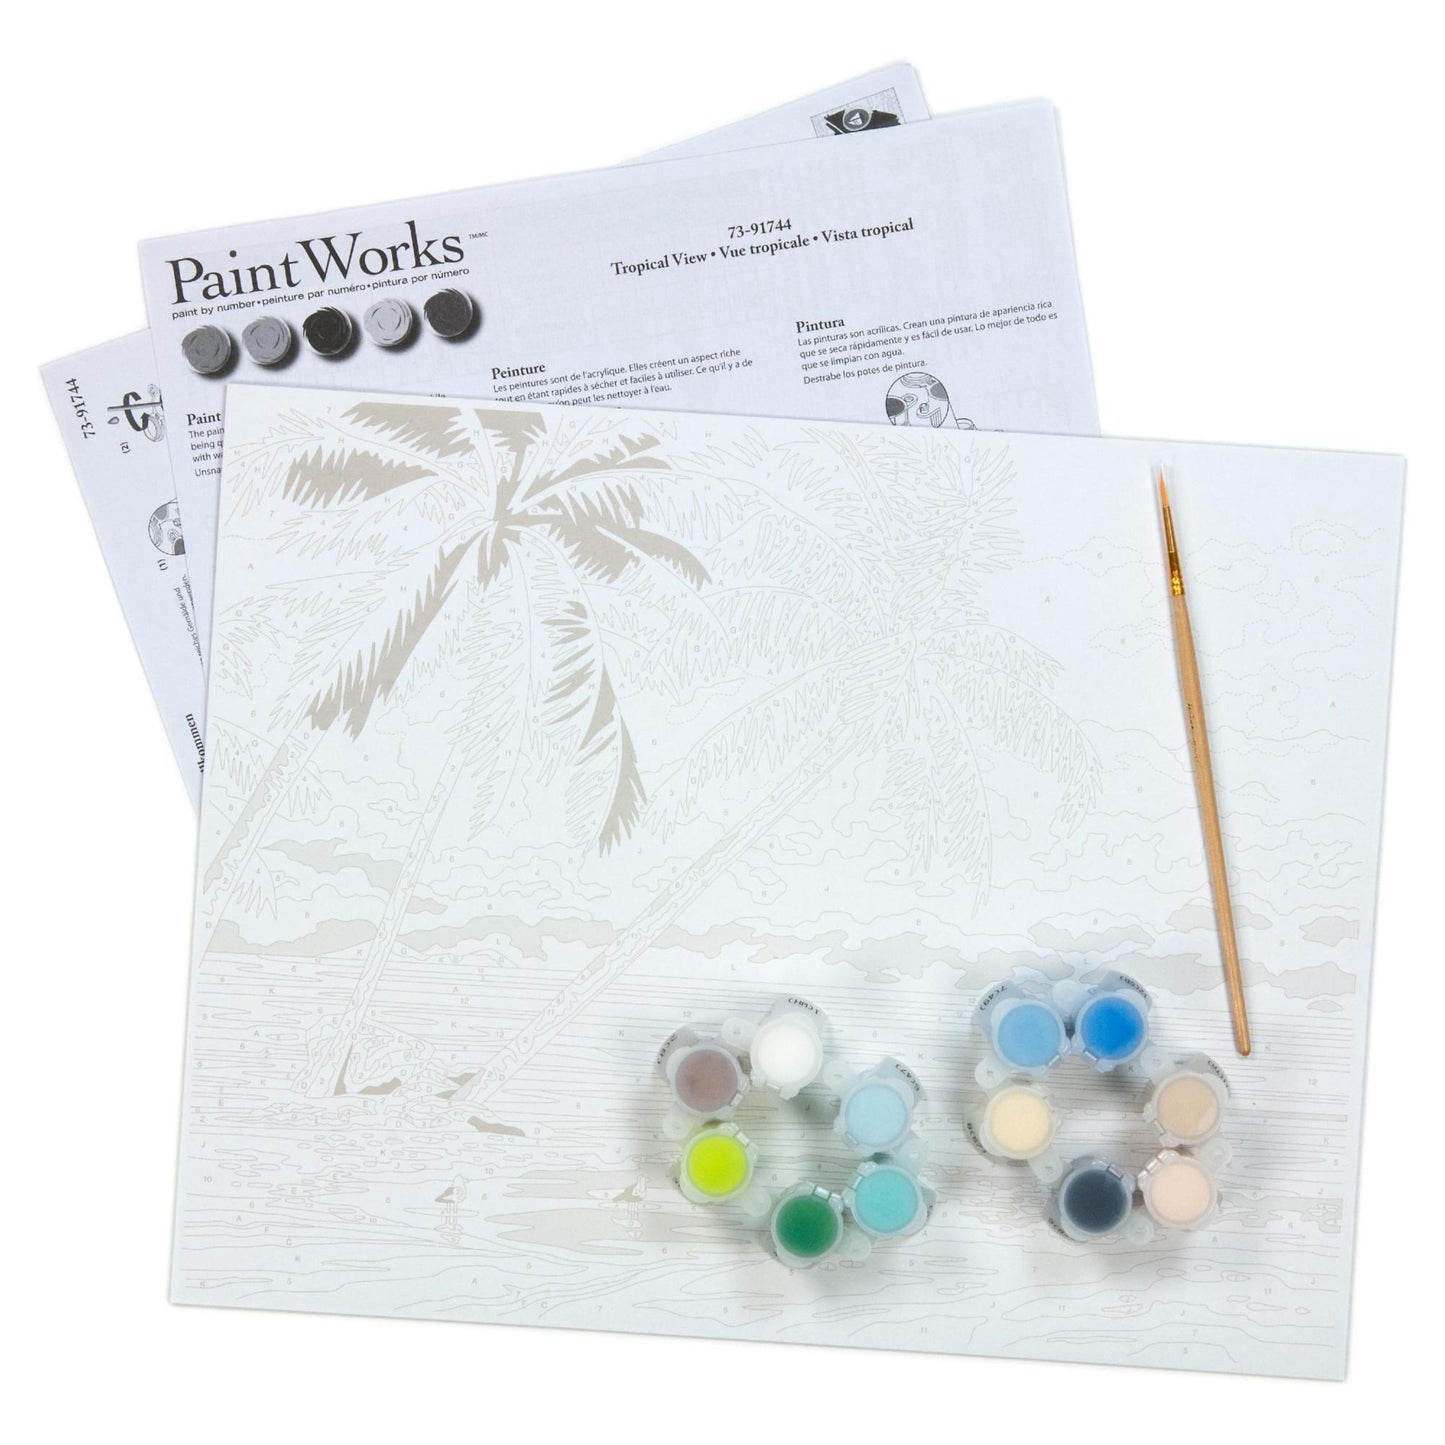 TROPICAL VIEW, Paint by Number Kit, DIMENSIONS PAINTWORKS (73-91744)